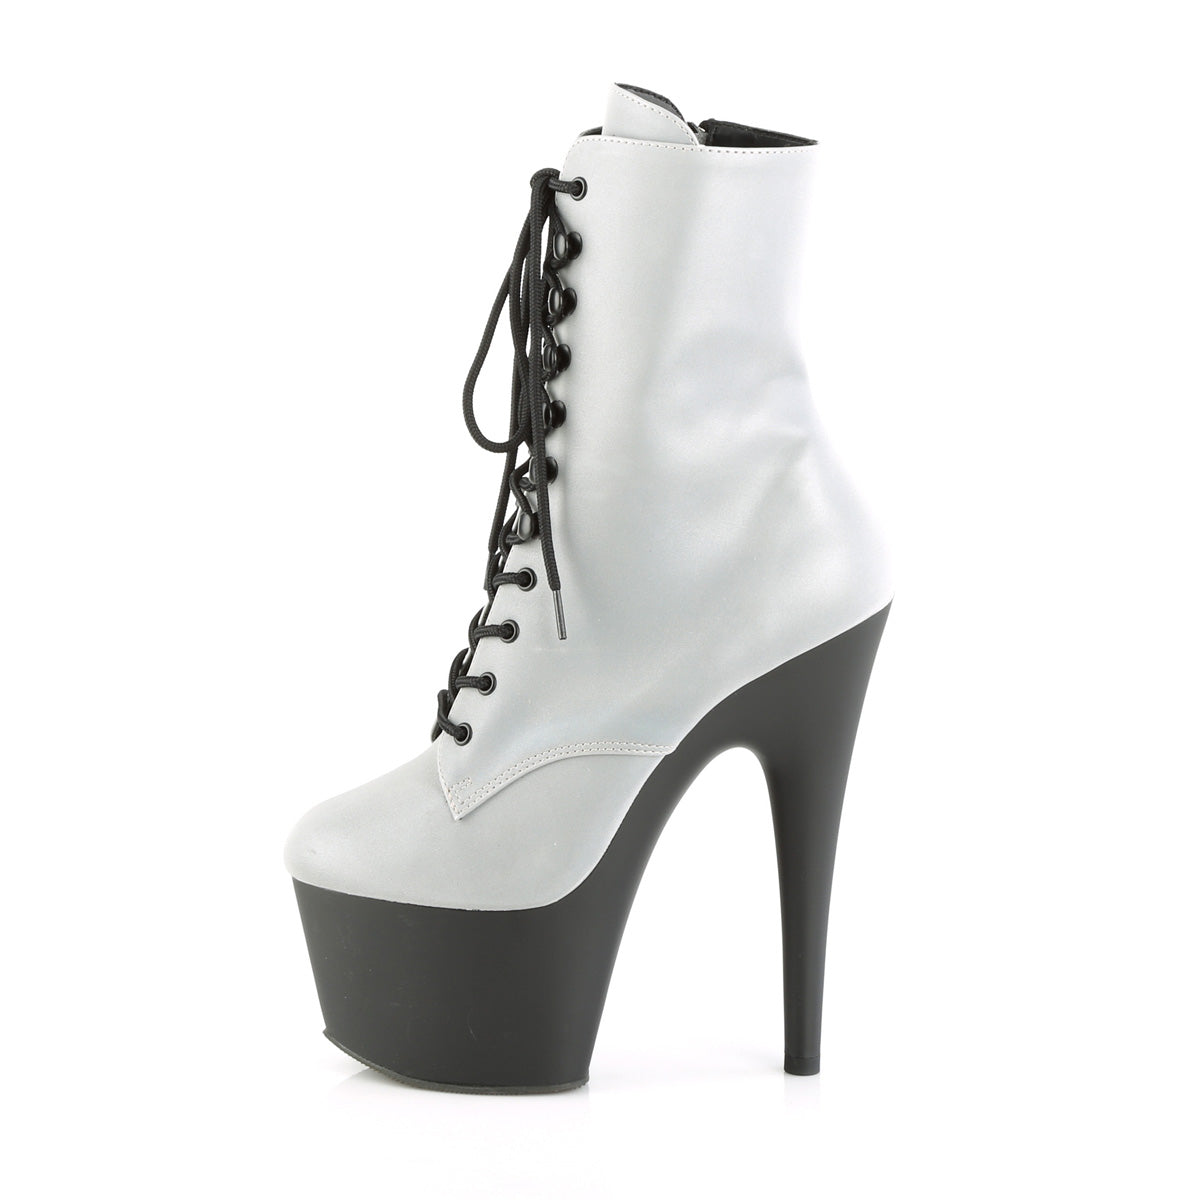 ADORE-1020REFL Pleaser Silver Reflective/Black Matte Platform Shoes [Sexy Ankle Boots]